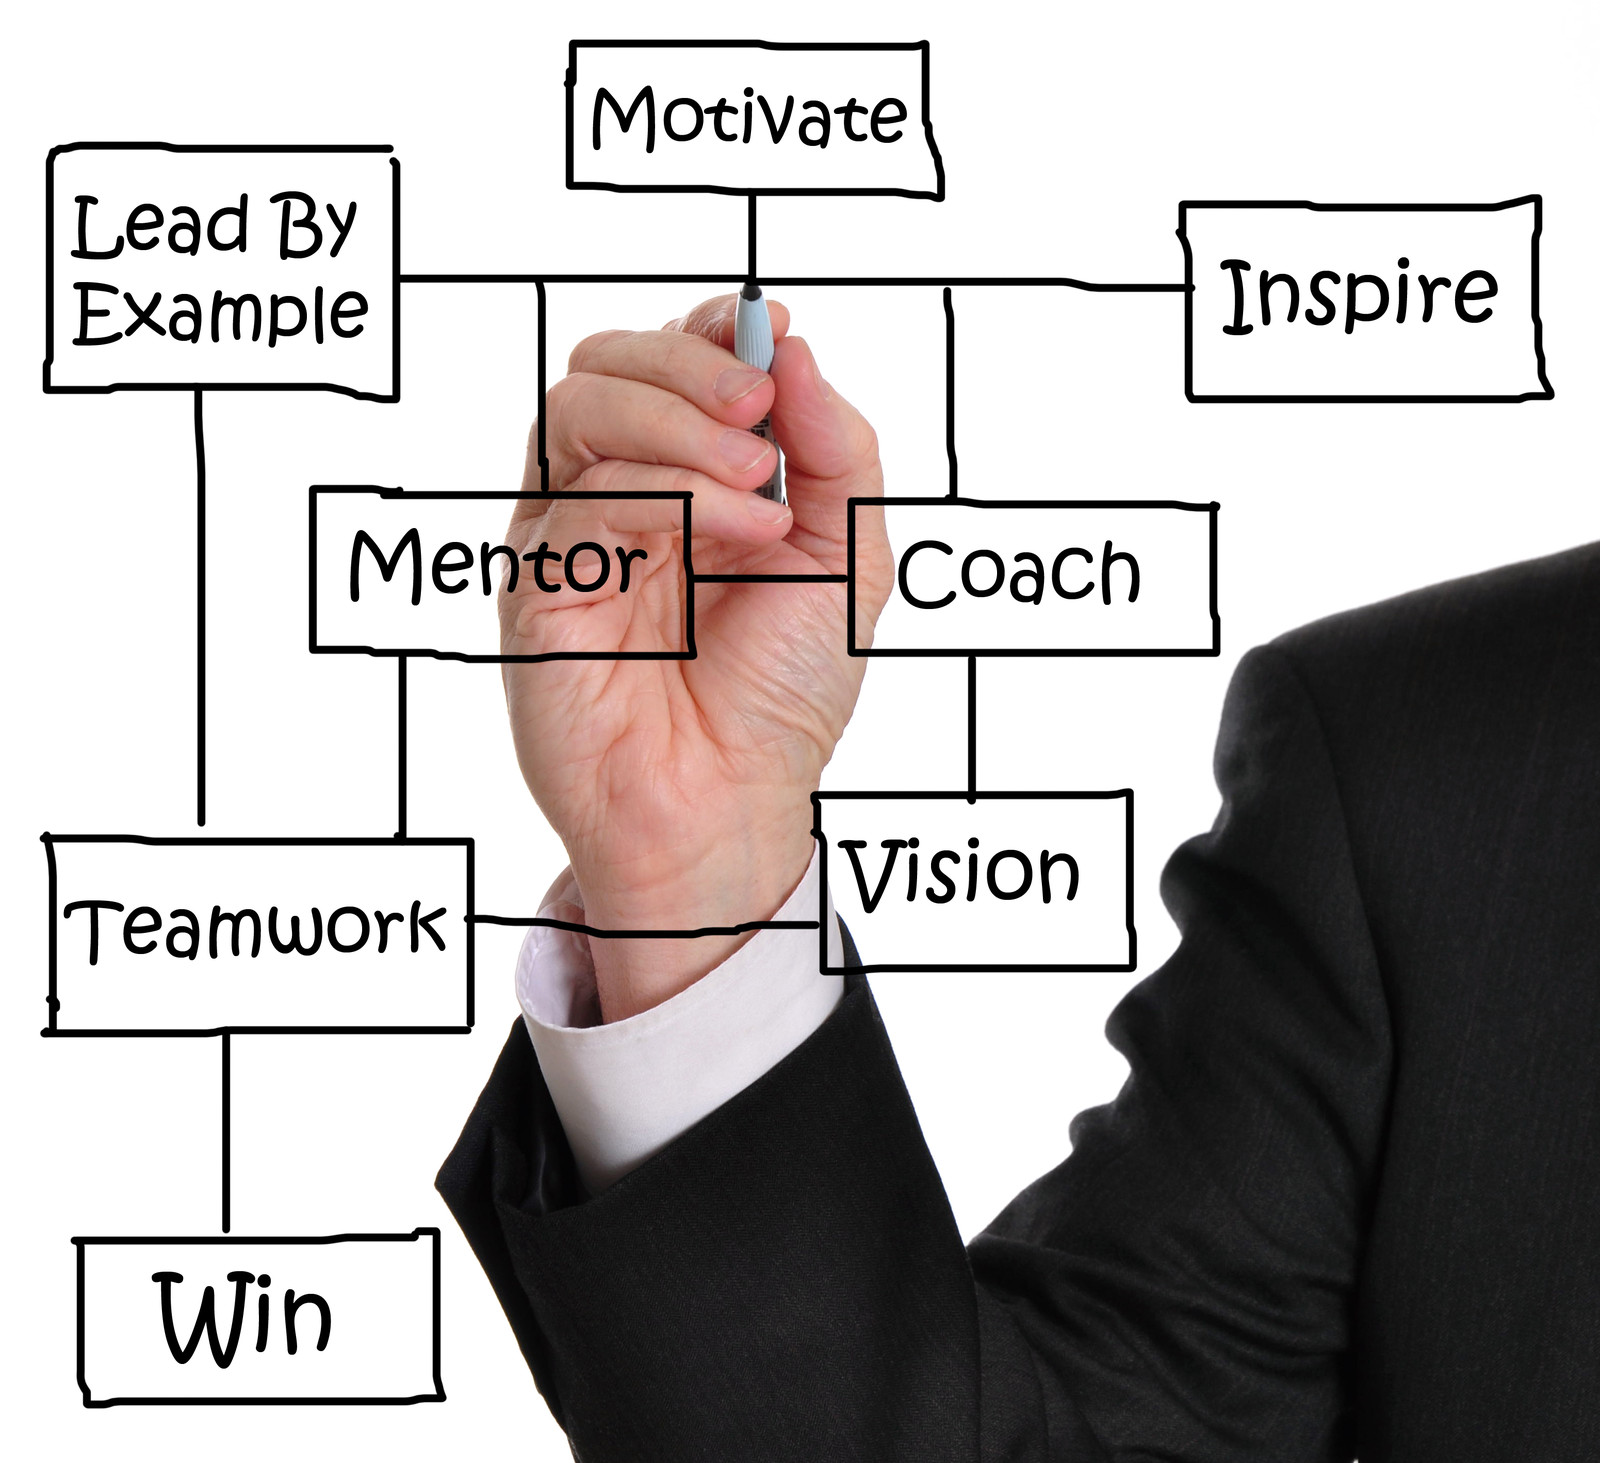 Need Help Finding Your Purpose In Life? You might need Executive Coaching